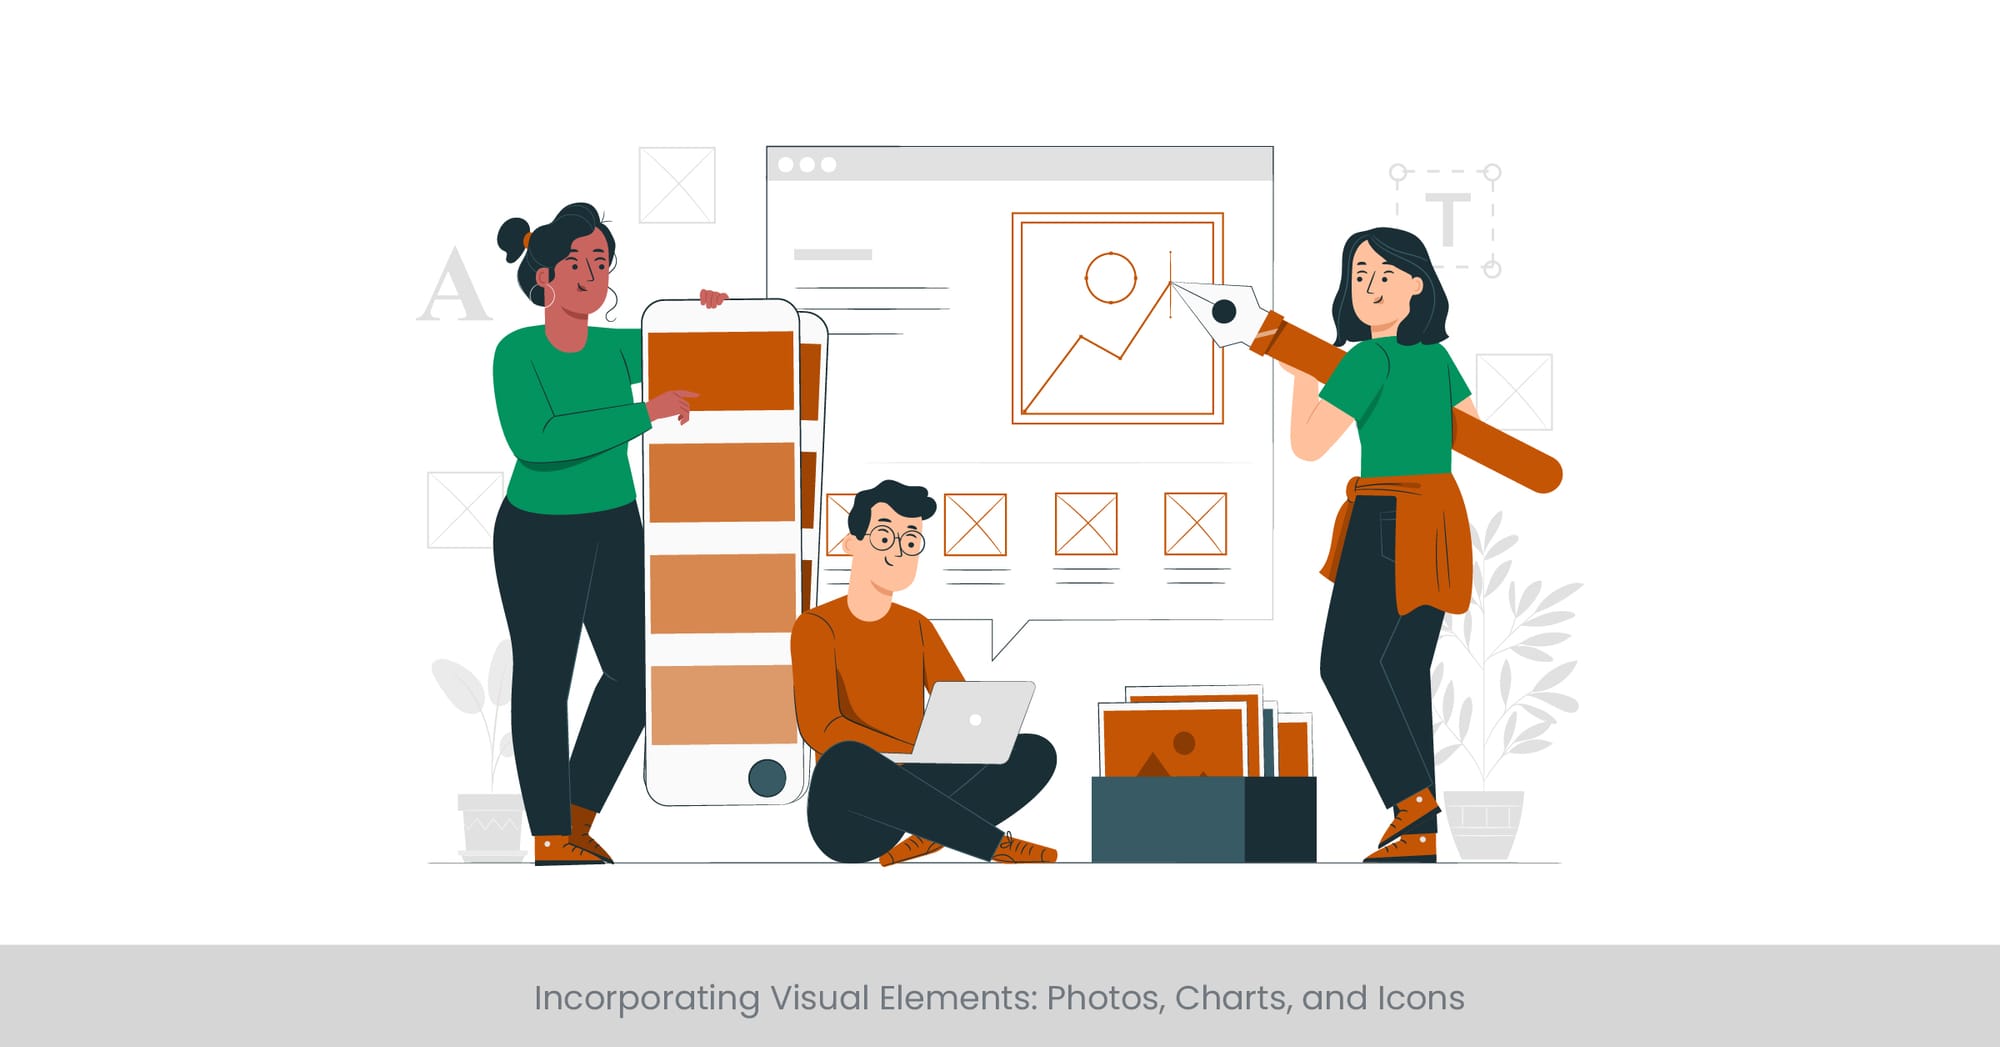 Incorporating Visual Elements: Photos, Charts, and Icons